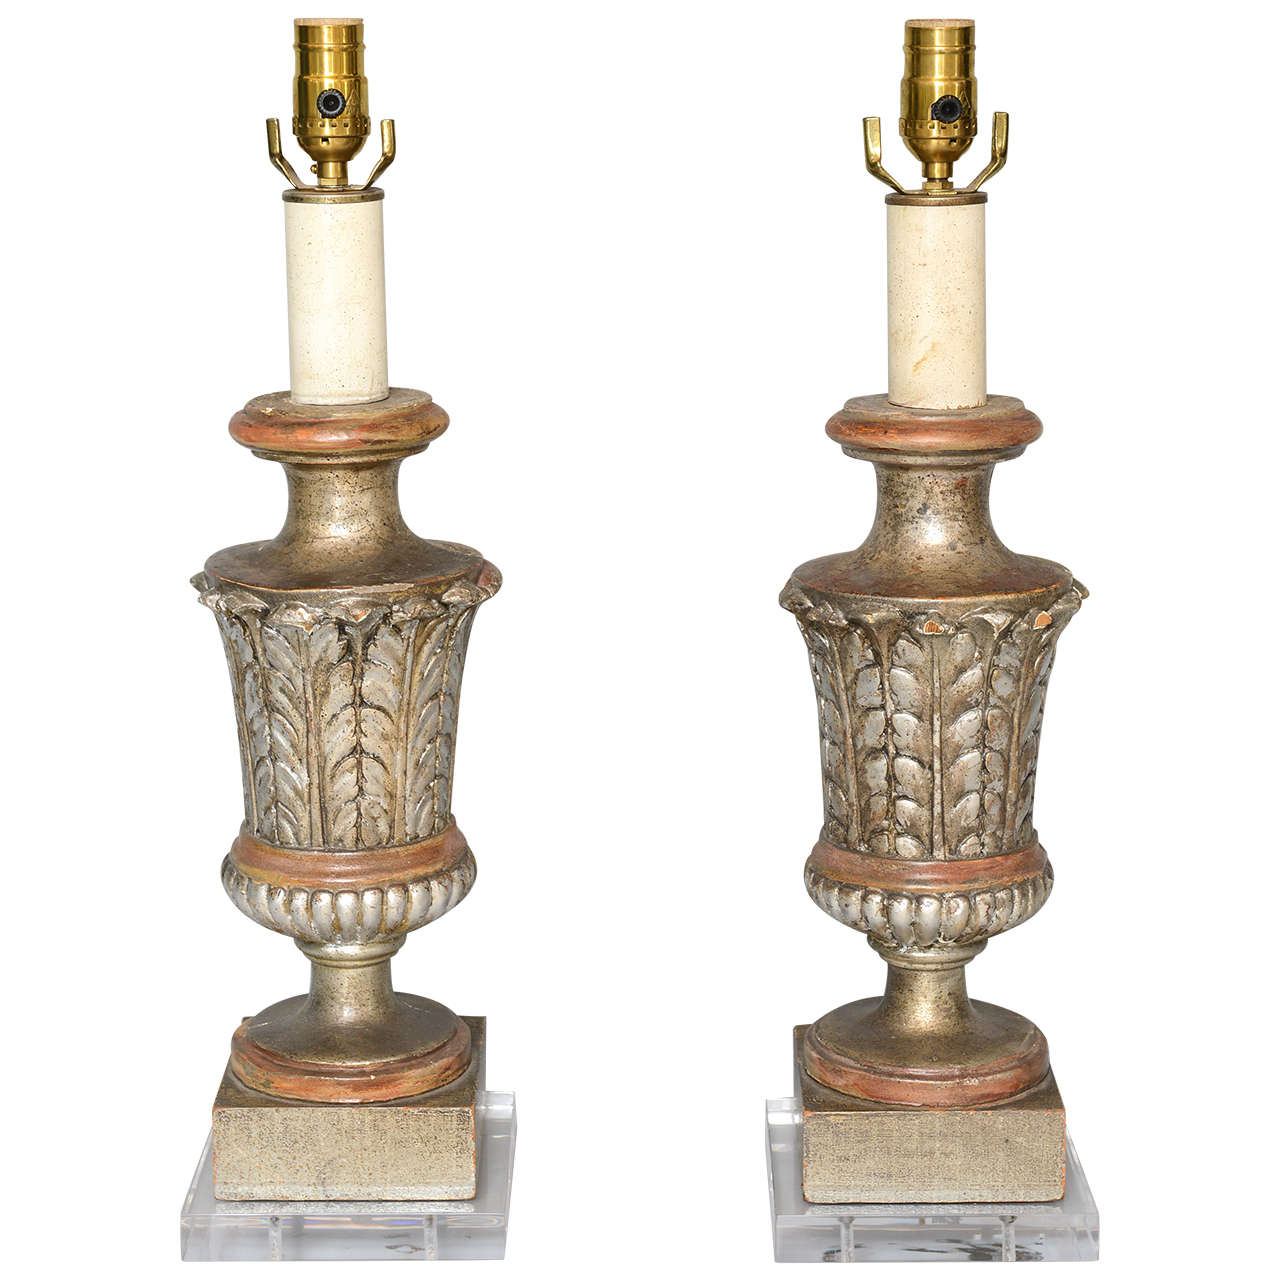 Pair of Early 19th C. Silvergilt Fragment Lamps on Lucite Bases For Sale